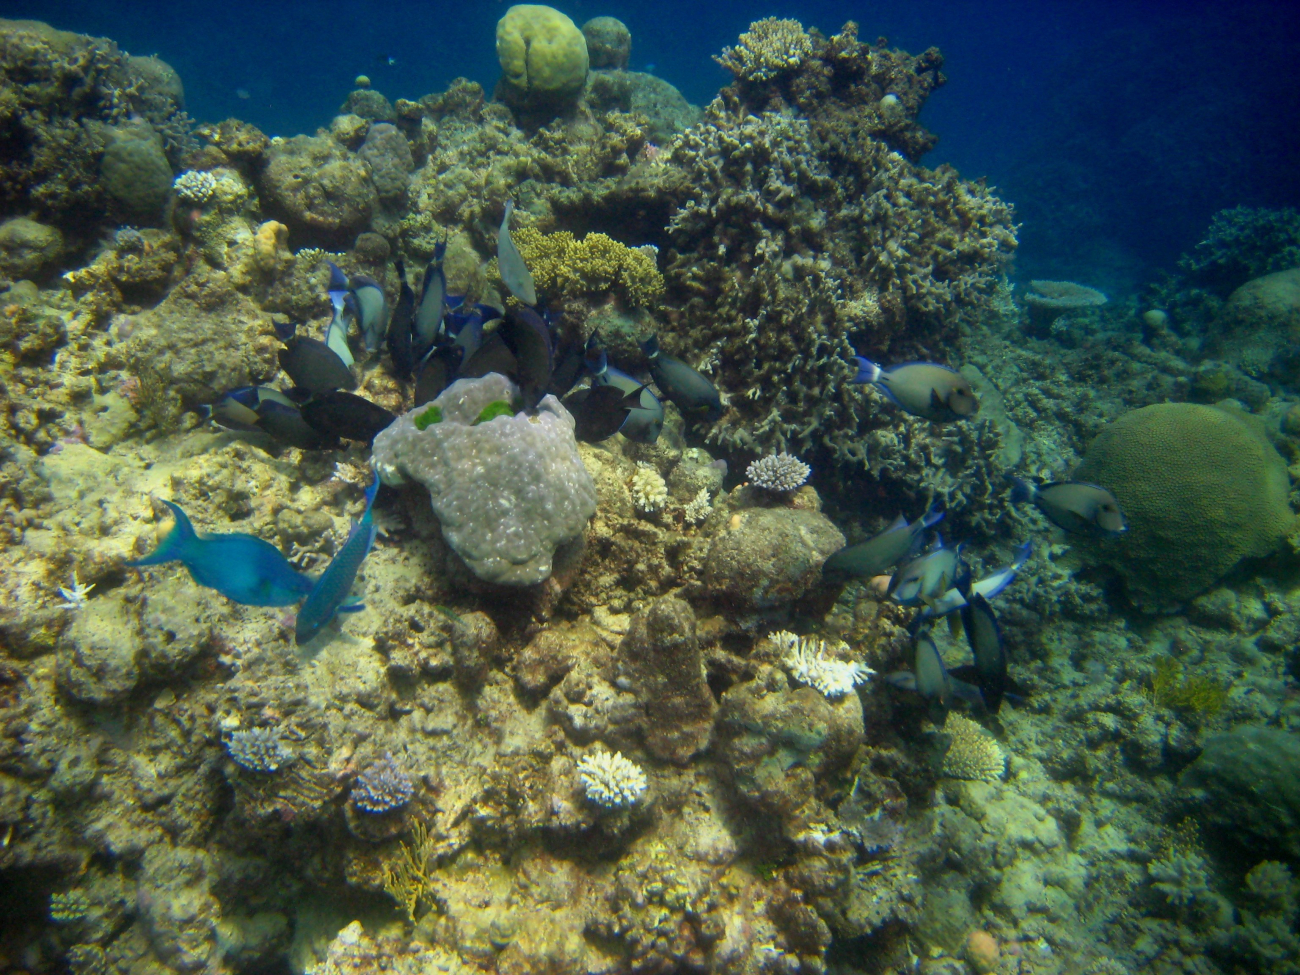 Two parrotfish and school of ringtail surgeonfish (Acanthurus blochii)